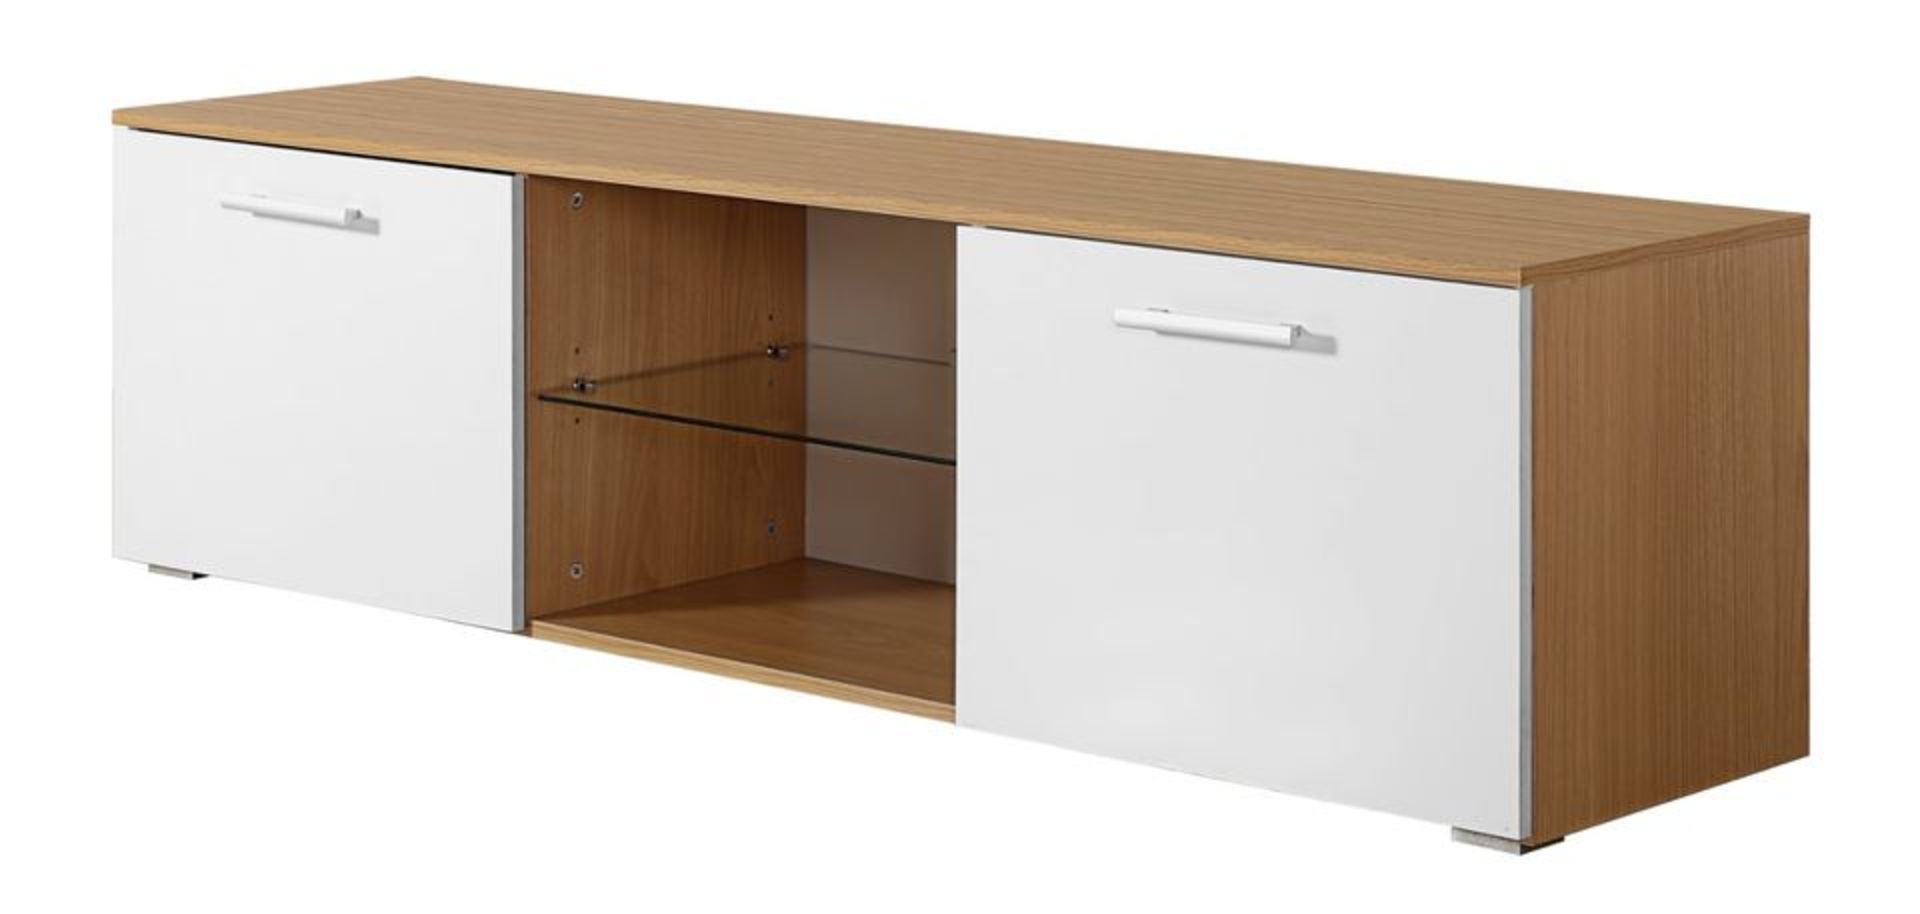 BRAND NEW 160CM WHITE ON OAK TV STAND (TV32) - Image 4 of 7